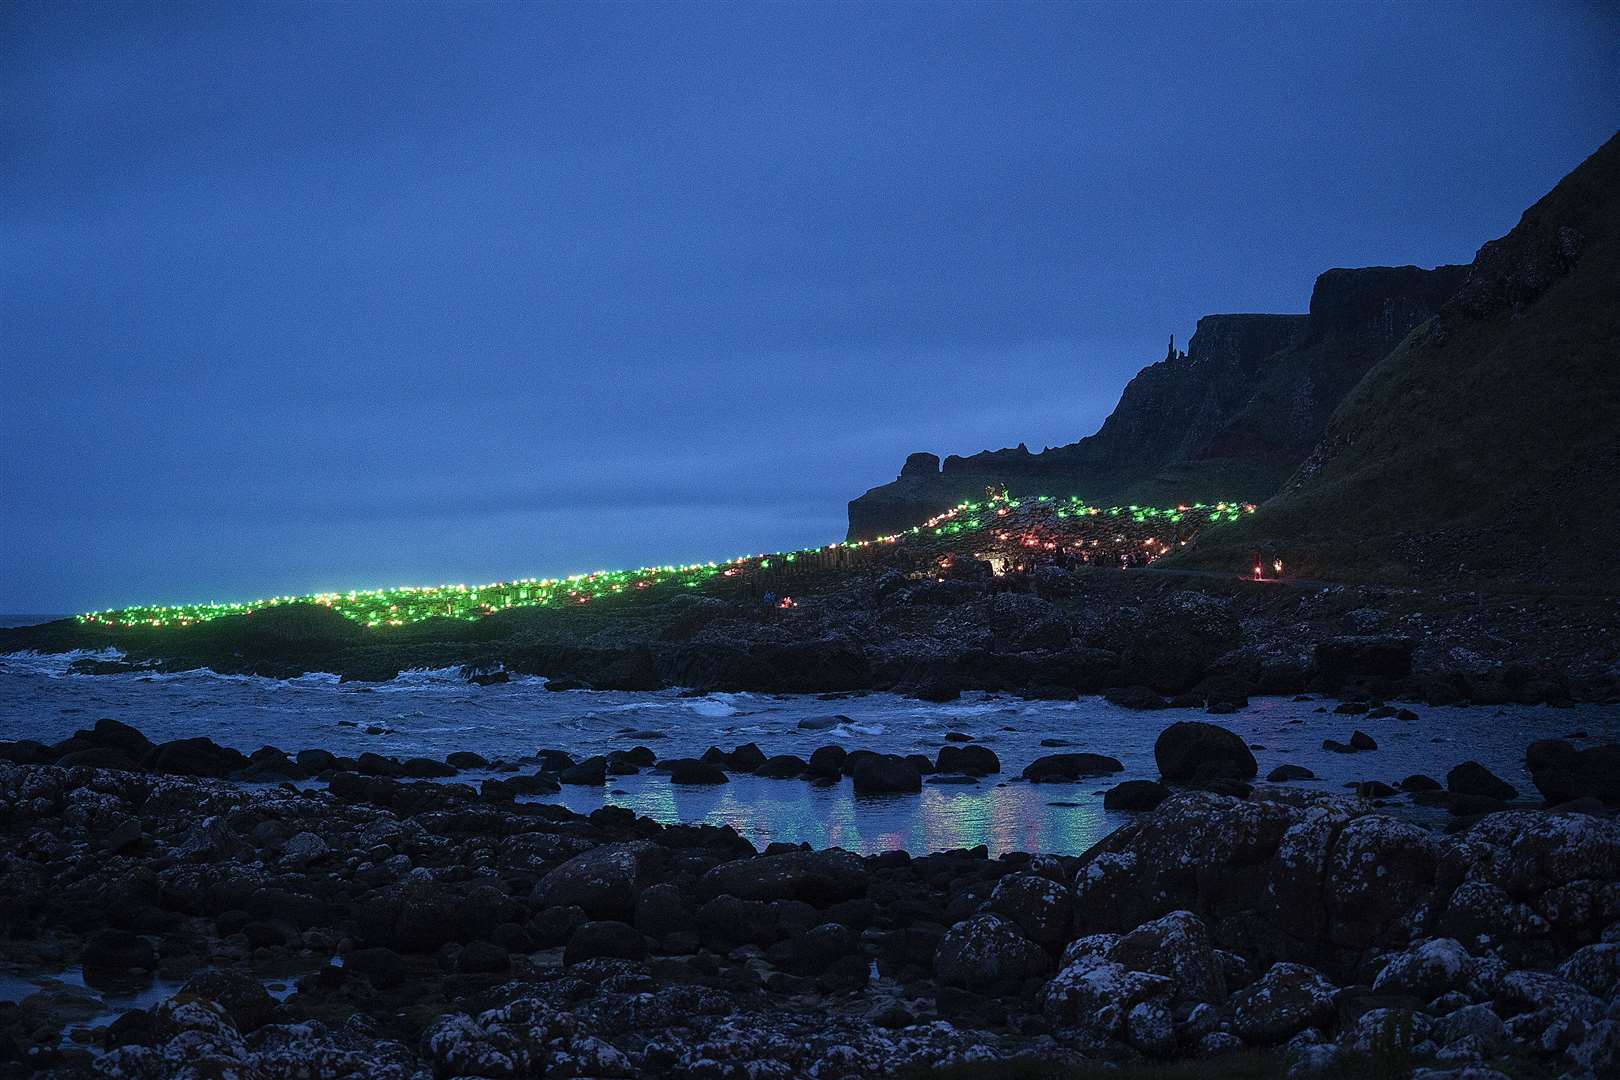 The Giant’s Causeway was illuminated with low impact Geolights (Brian Morrison/PA)